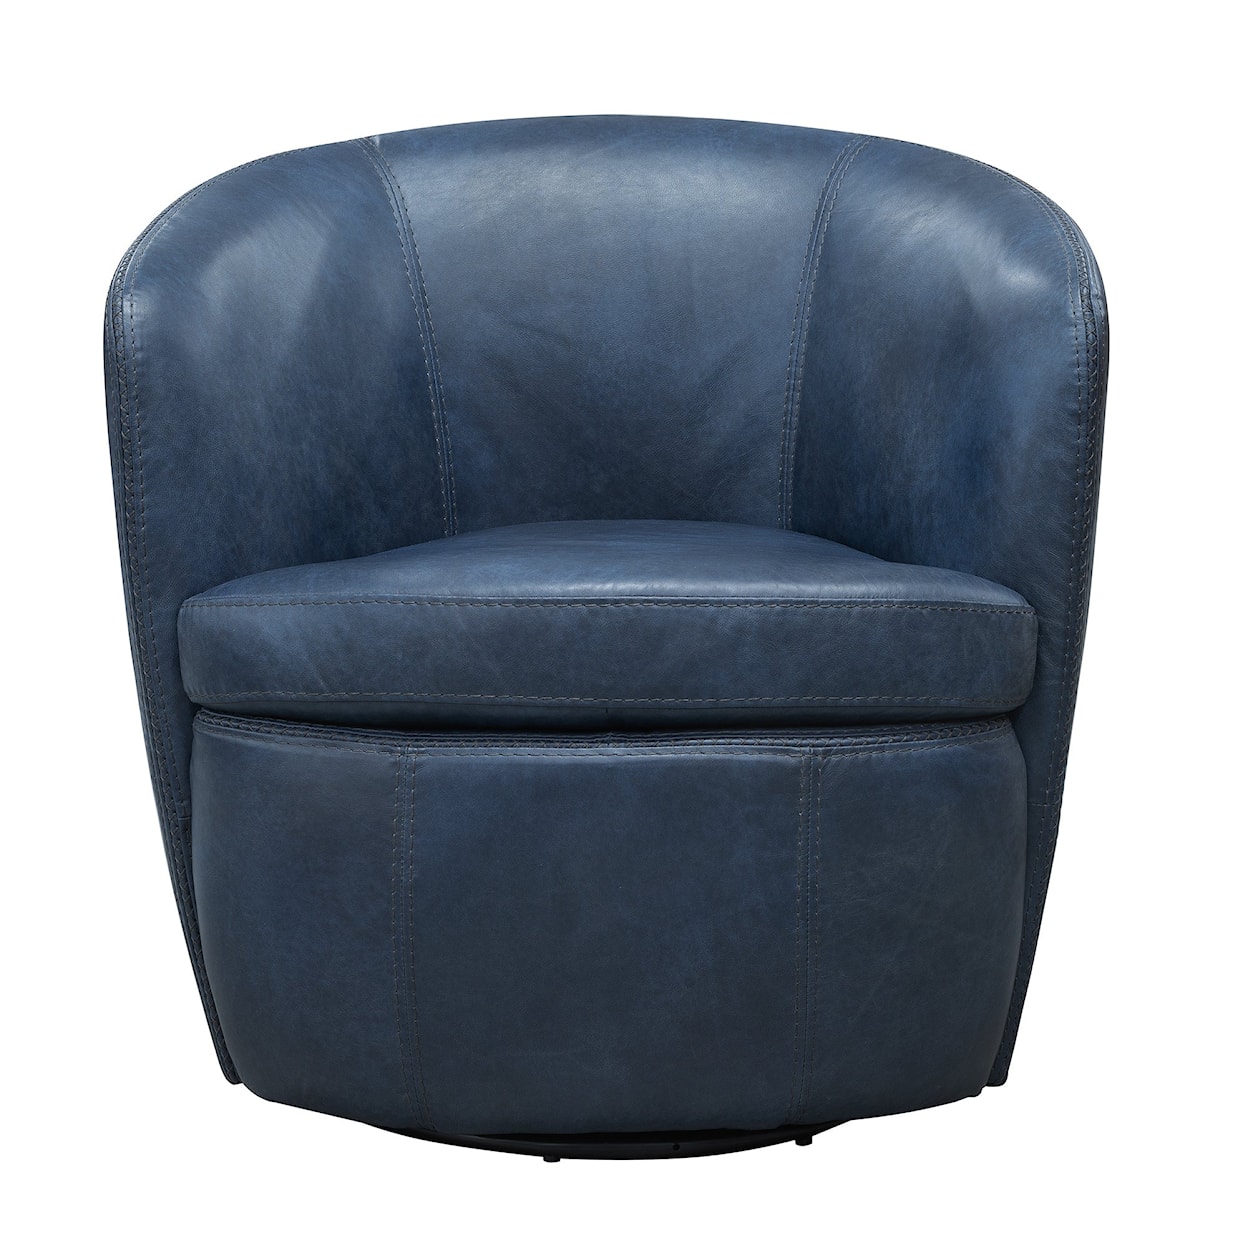 Forest Hills Benjamin Leather Swivel Chair